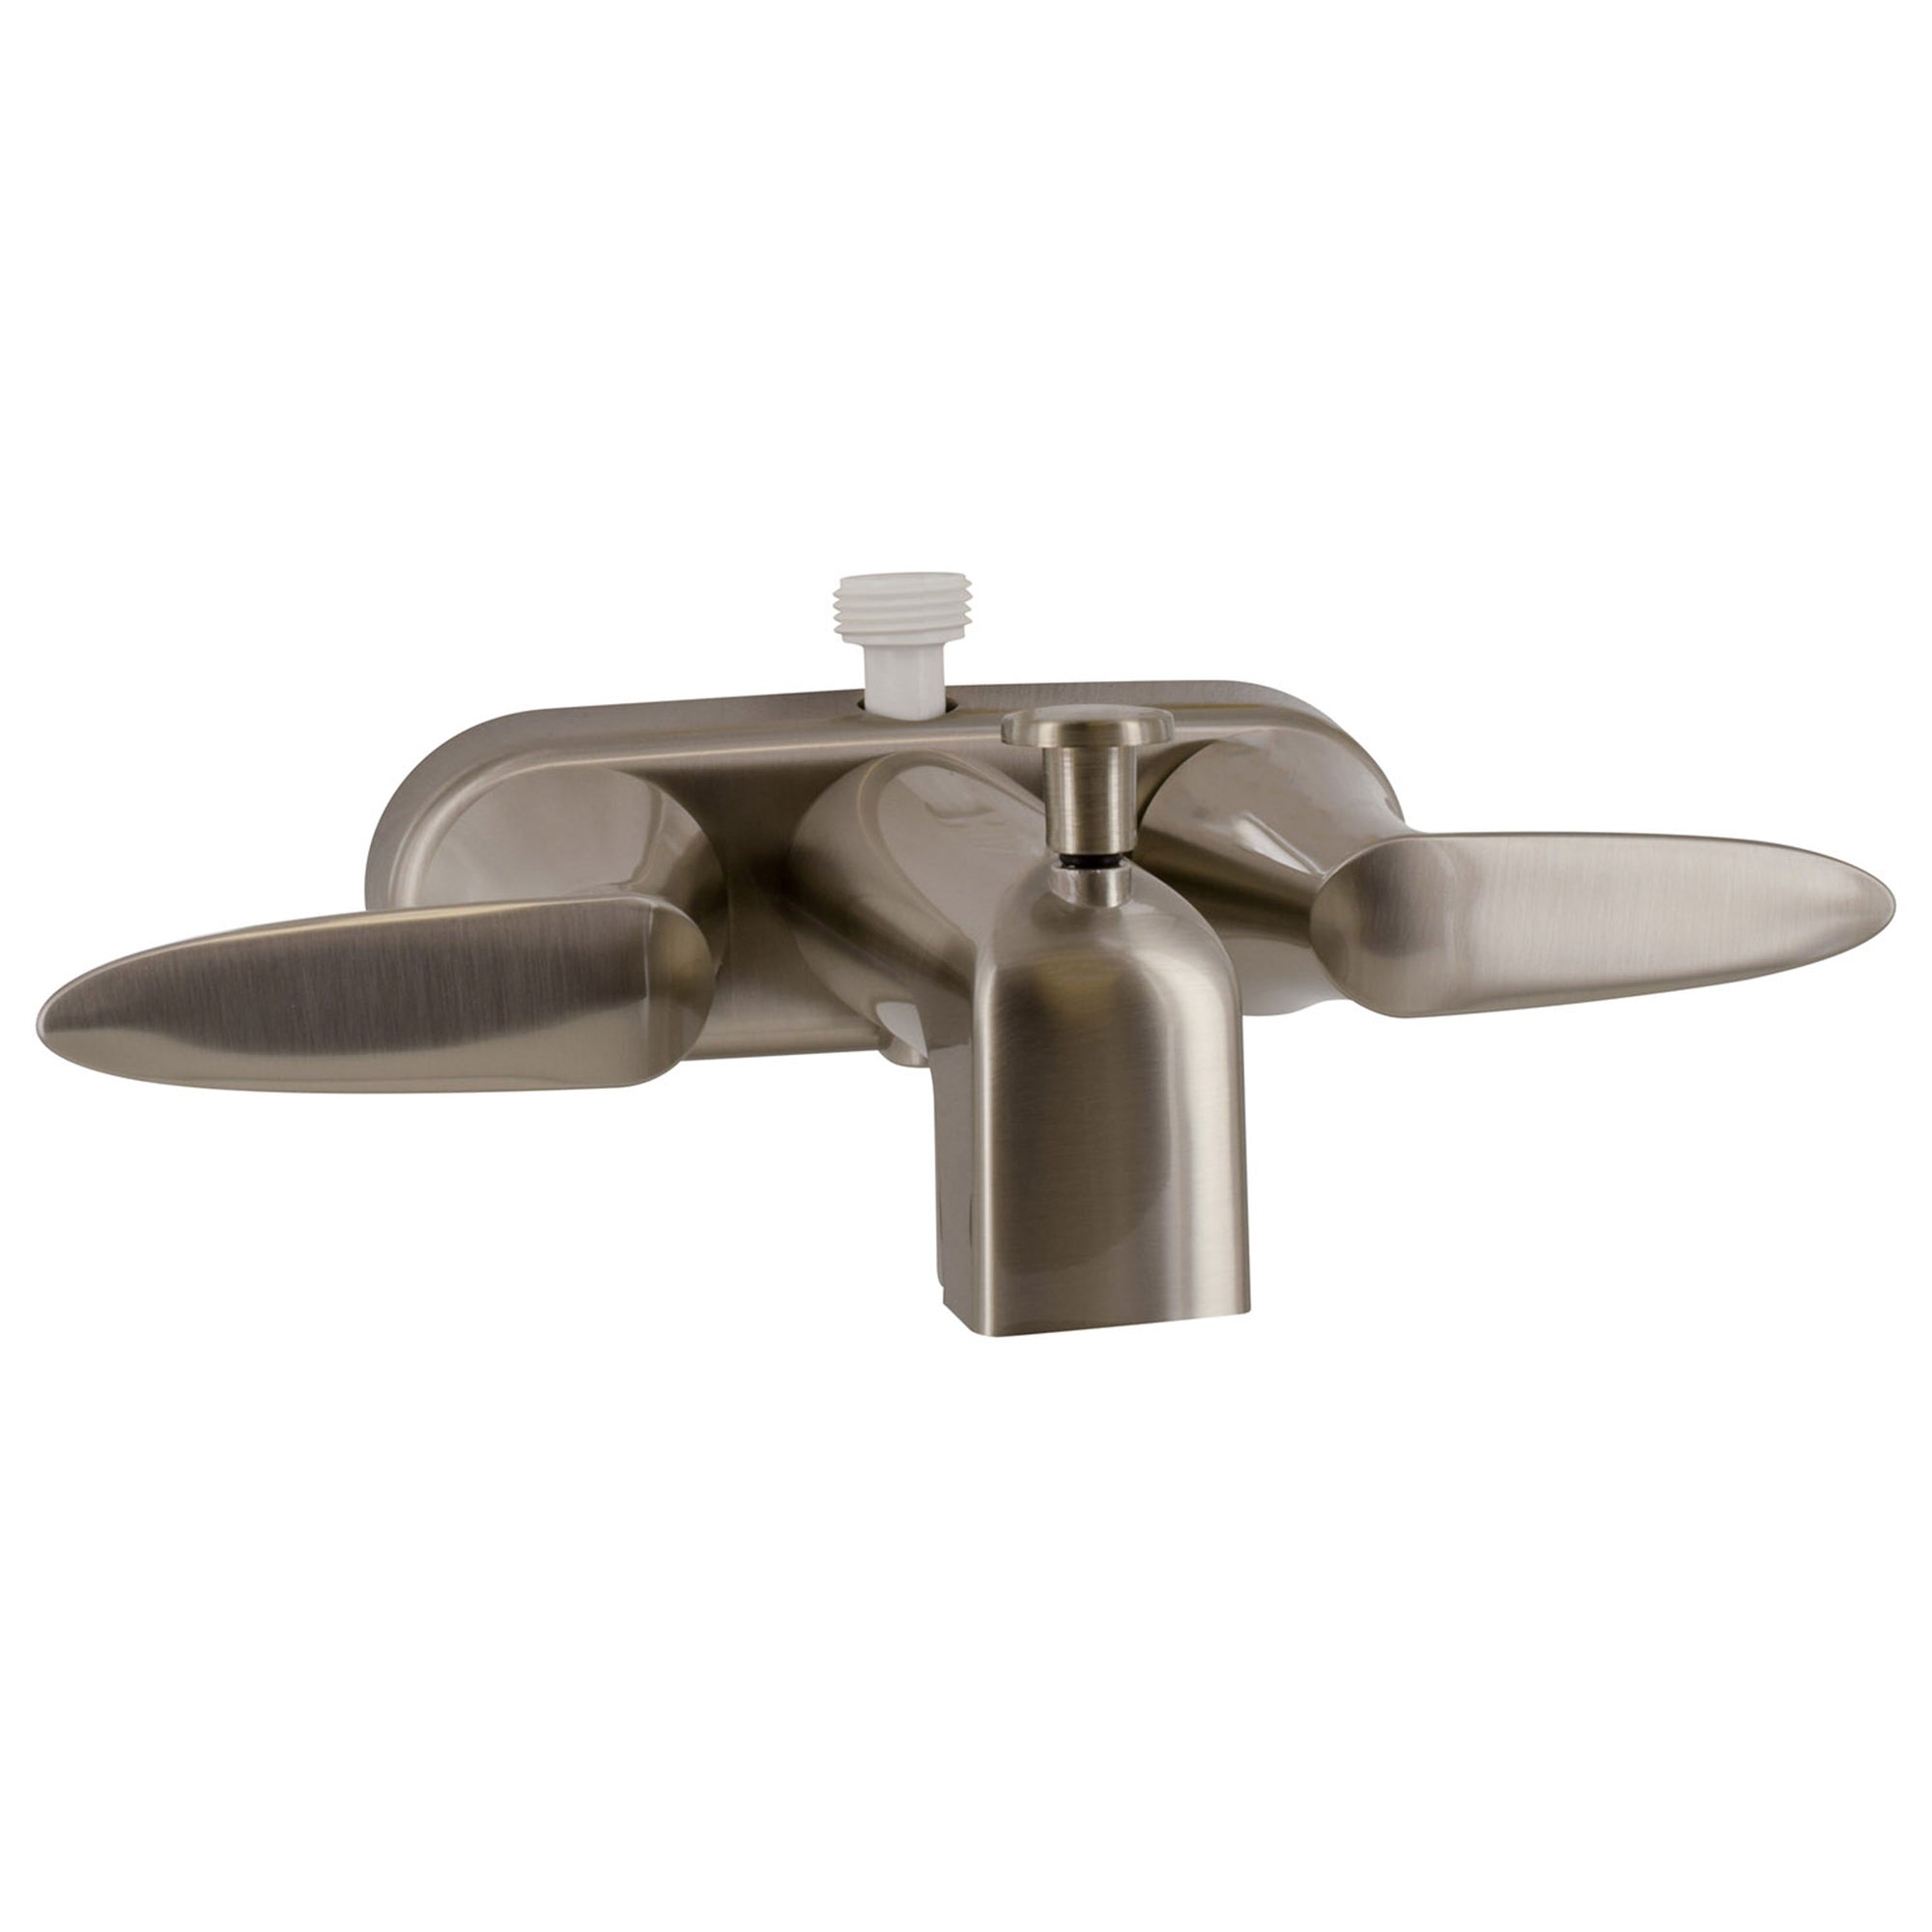 PF223403 Faucet 4" Tub W/Shower D-Spud Brushed Nickel 2-Lever Handle